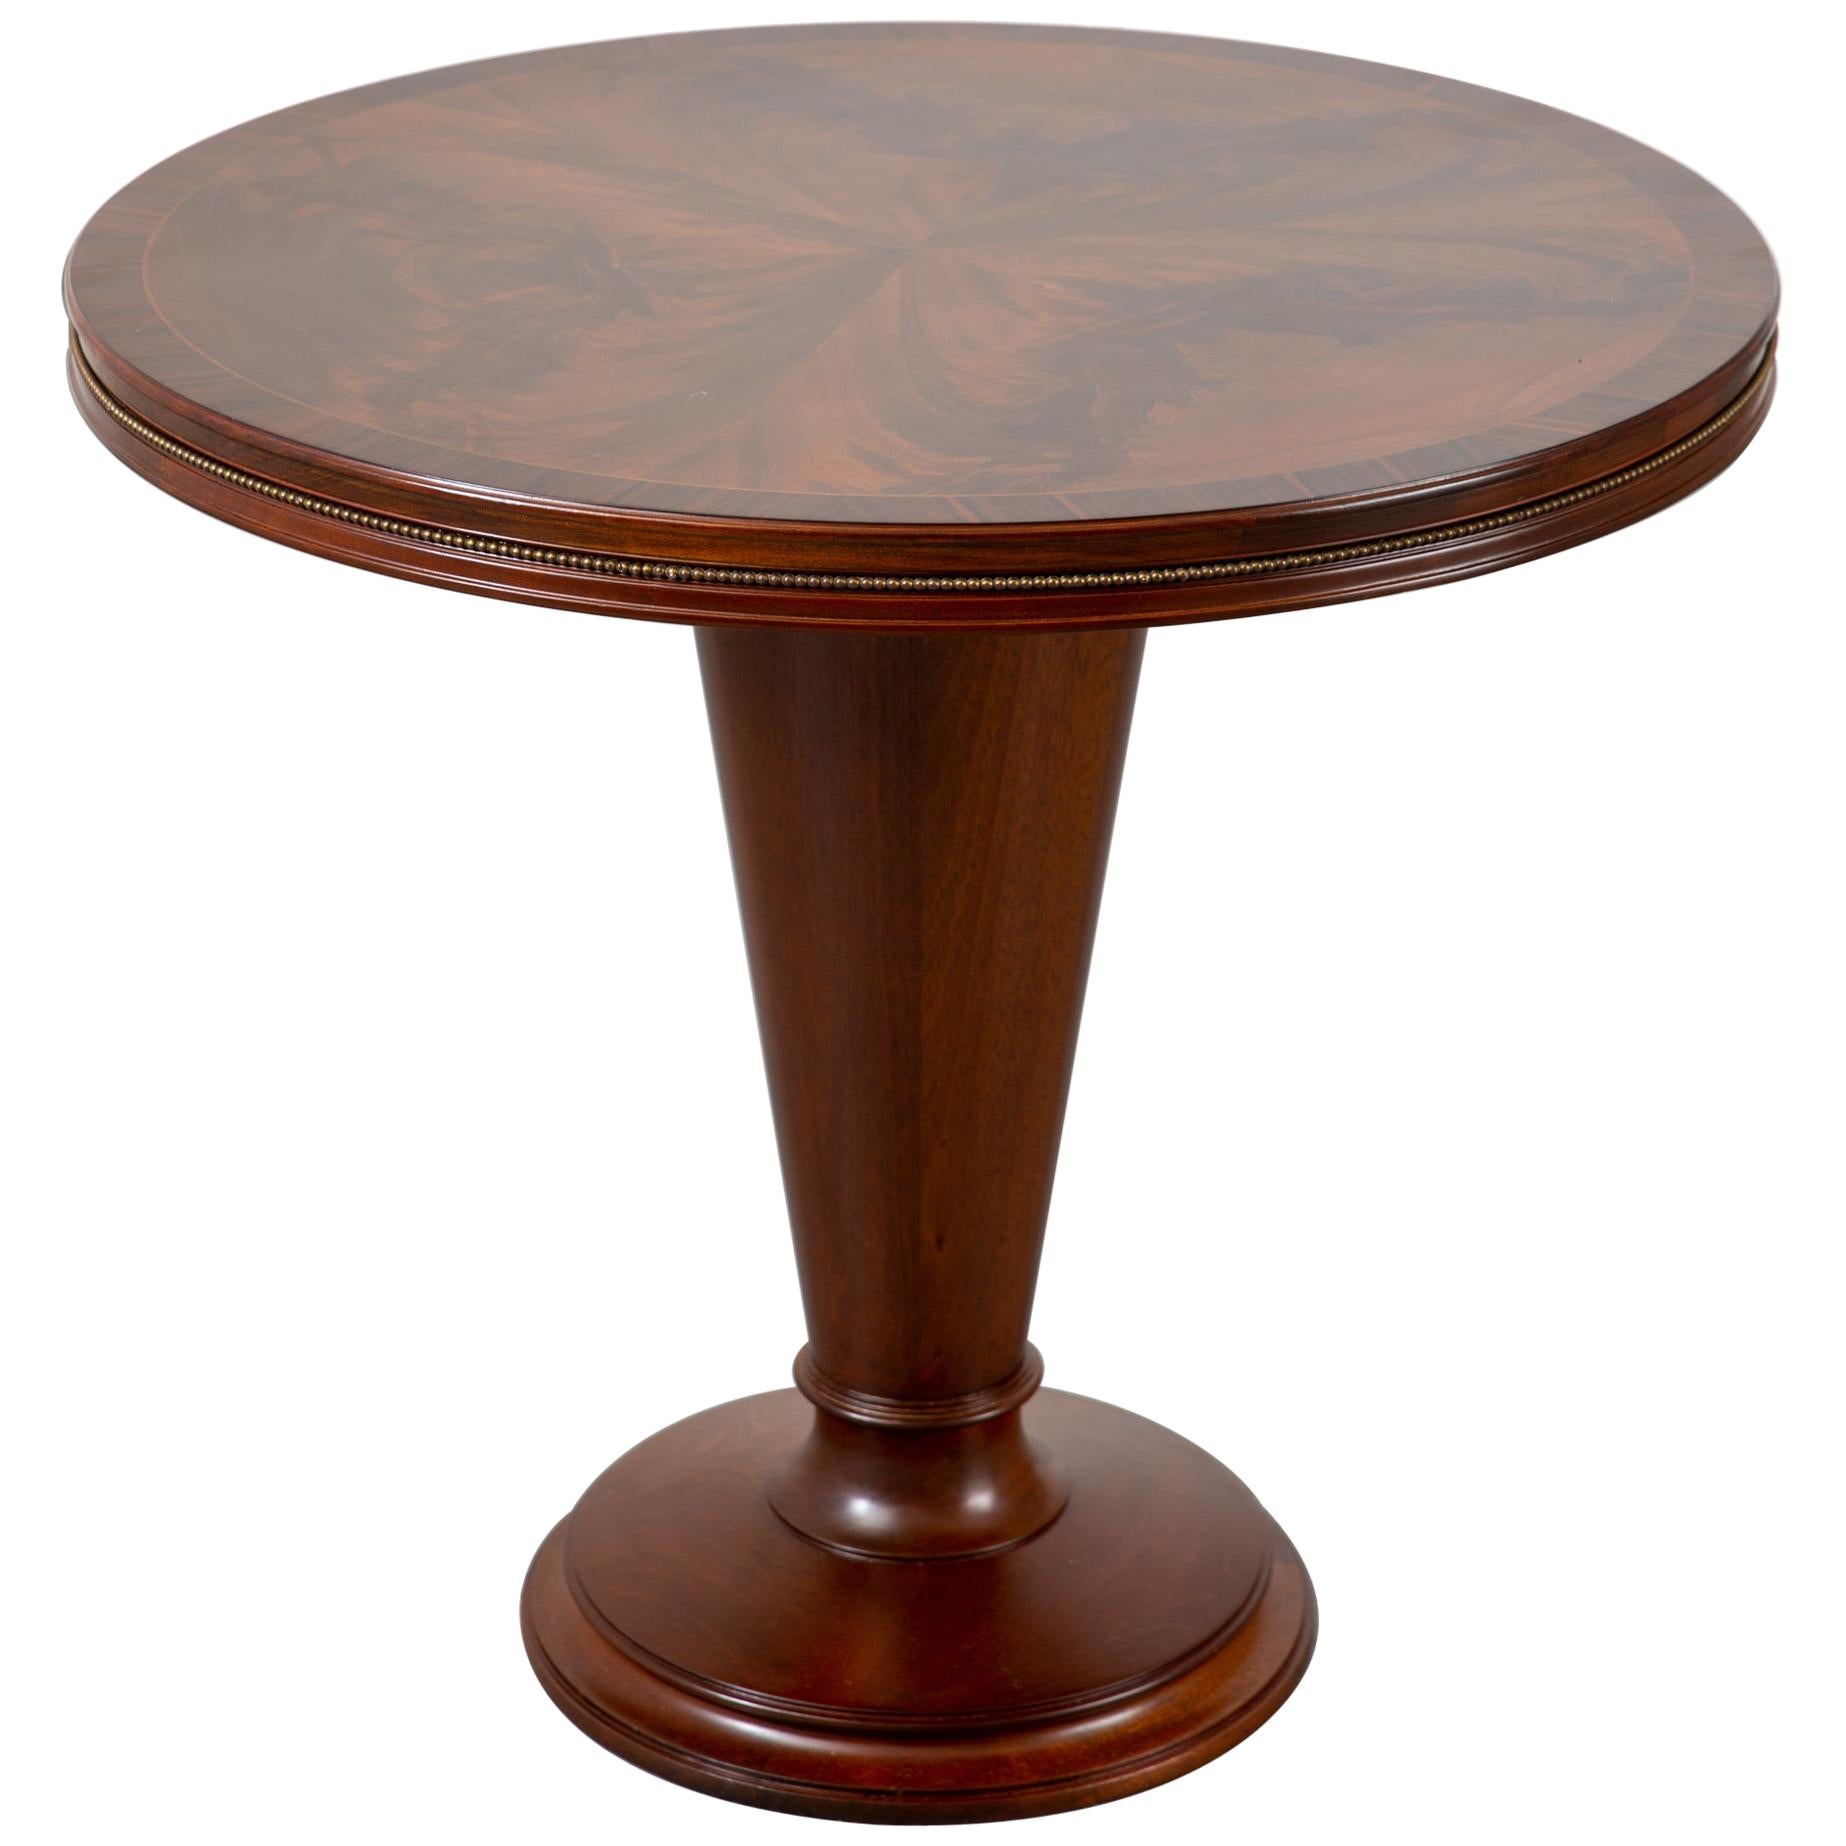 1940's Art Deco Round Center Table with Book Matched Flame Top For Sale